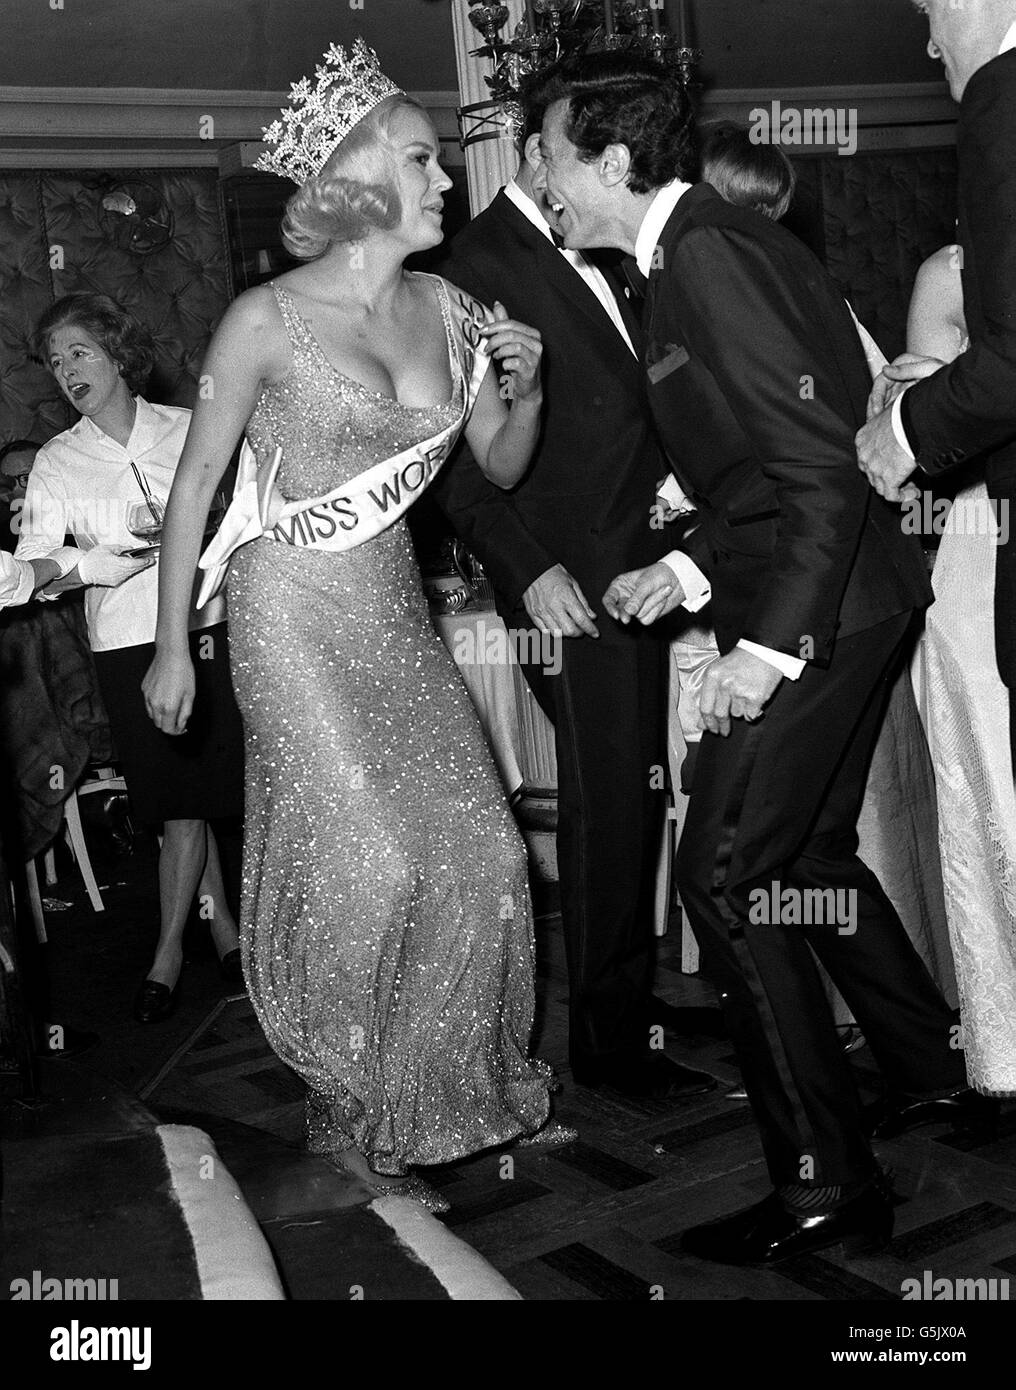 1965: The new Miss World, Britain's Lesley Langley, takes to the floor with dancer Lionel Blair after she had won the title at the Lyceum in London. Stock Photo